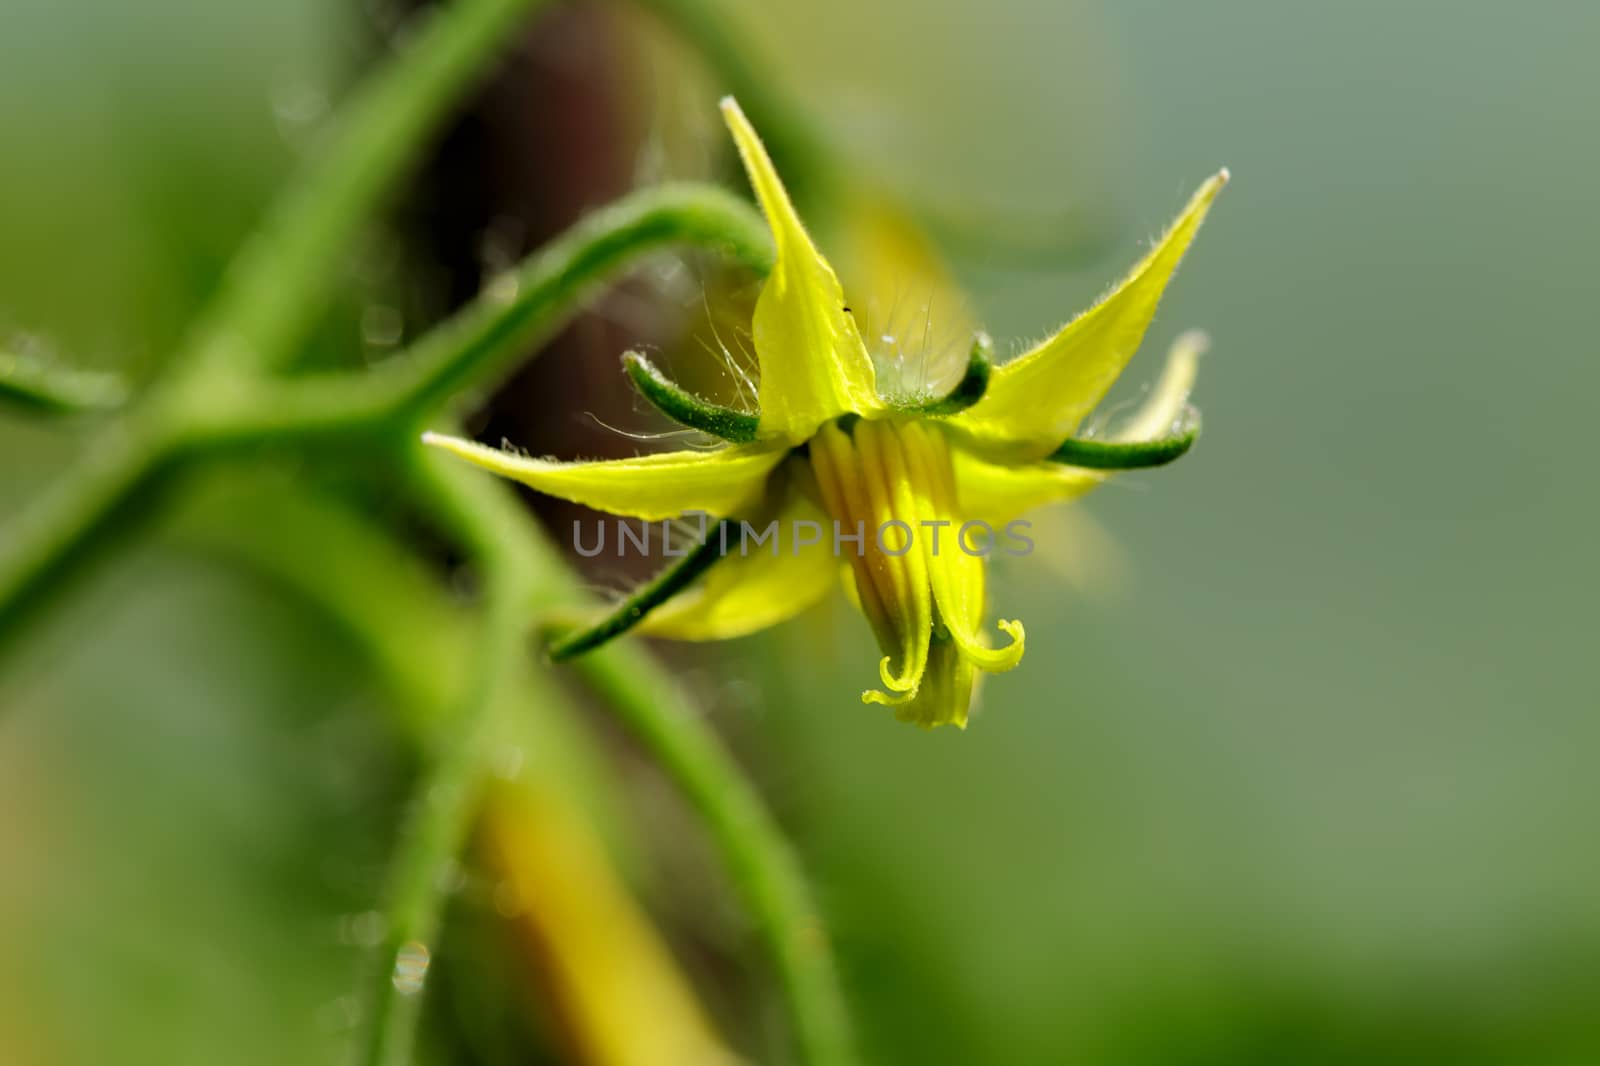 The flower of a tomato plant.